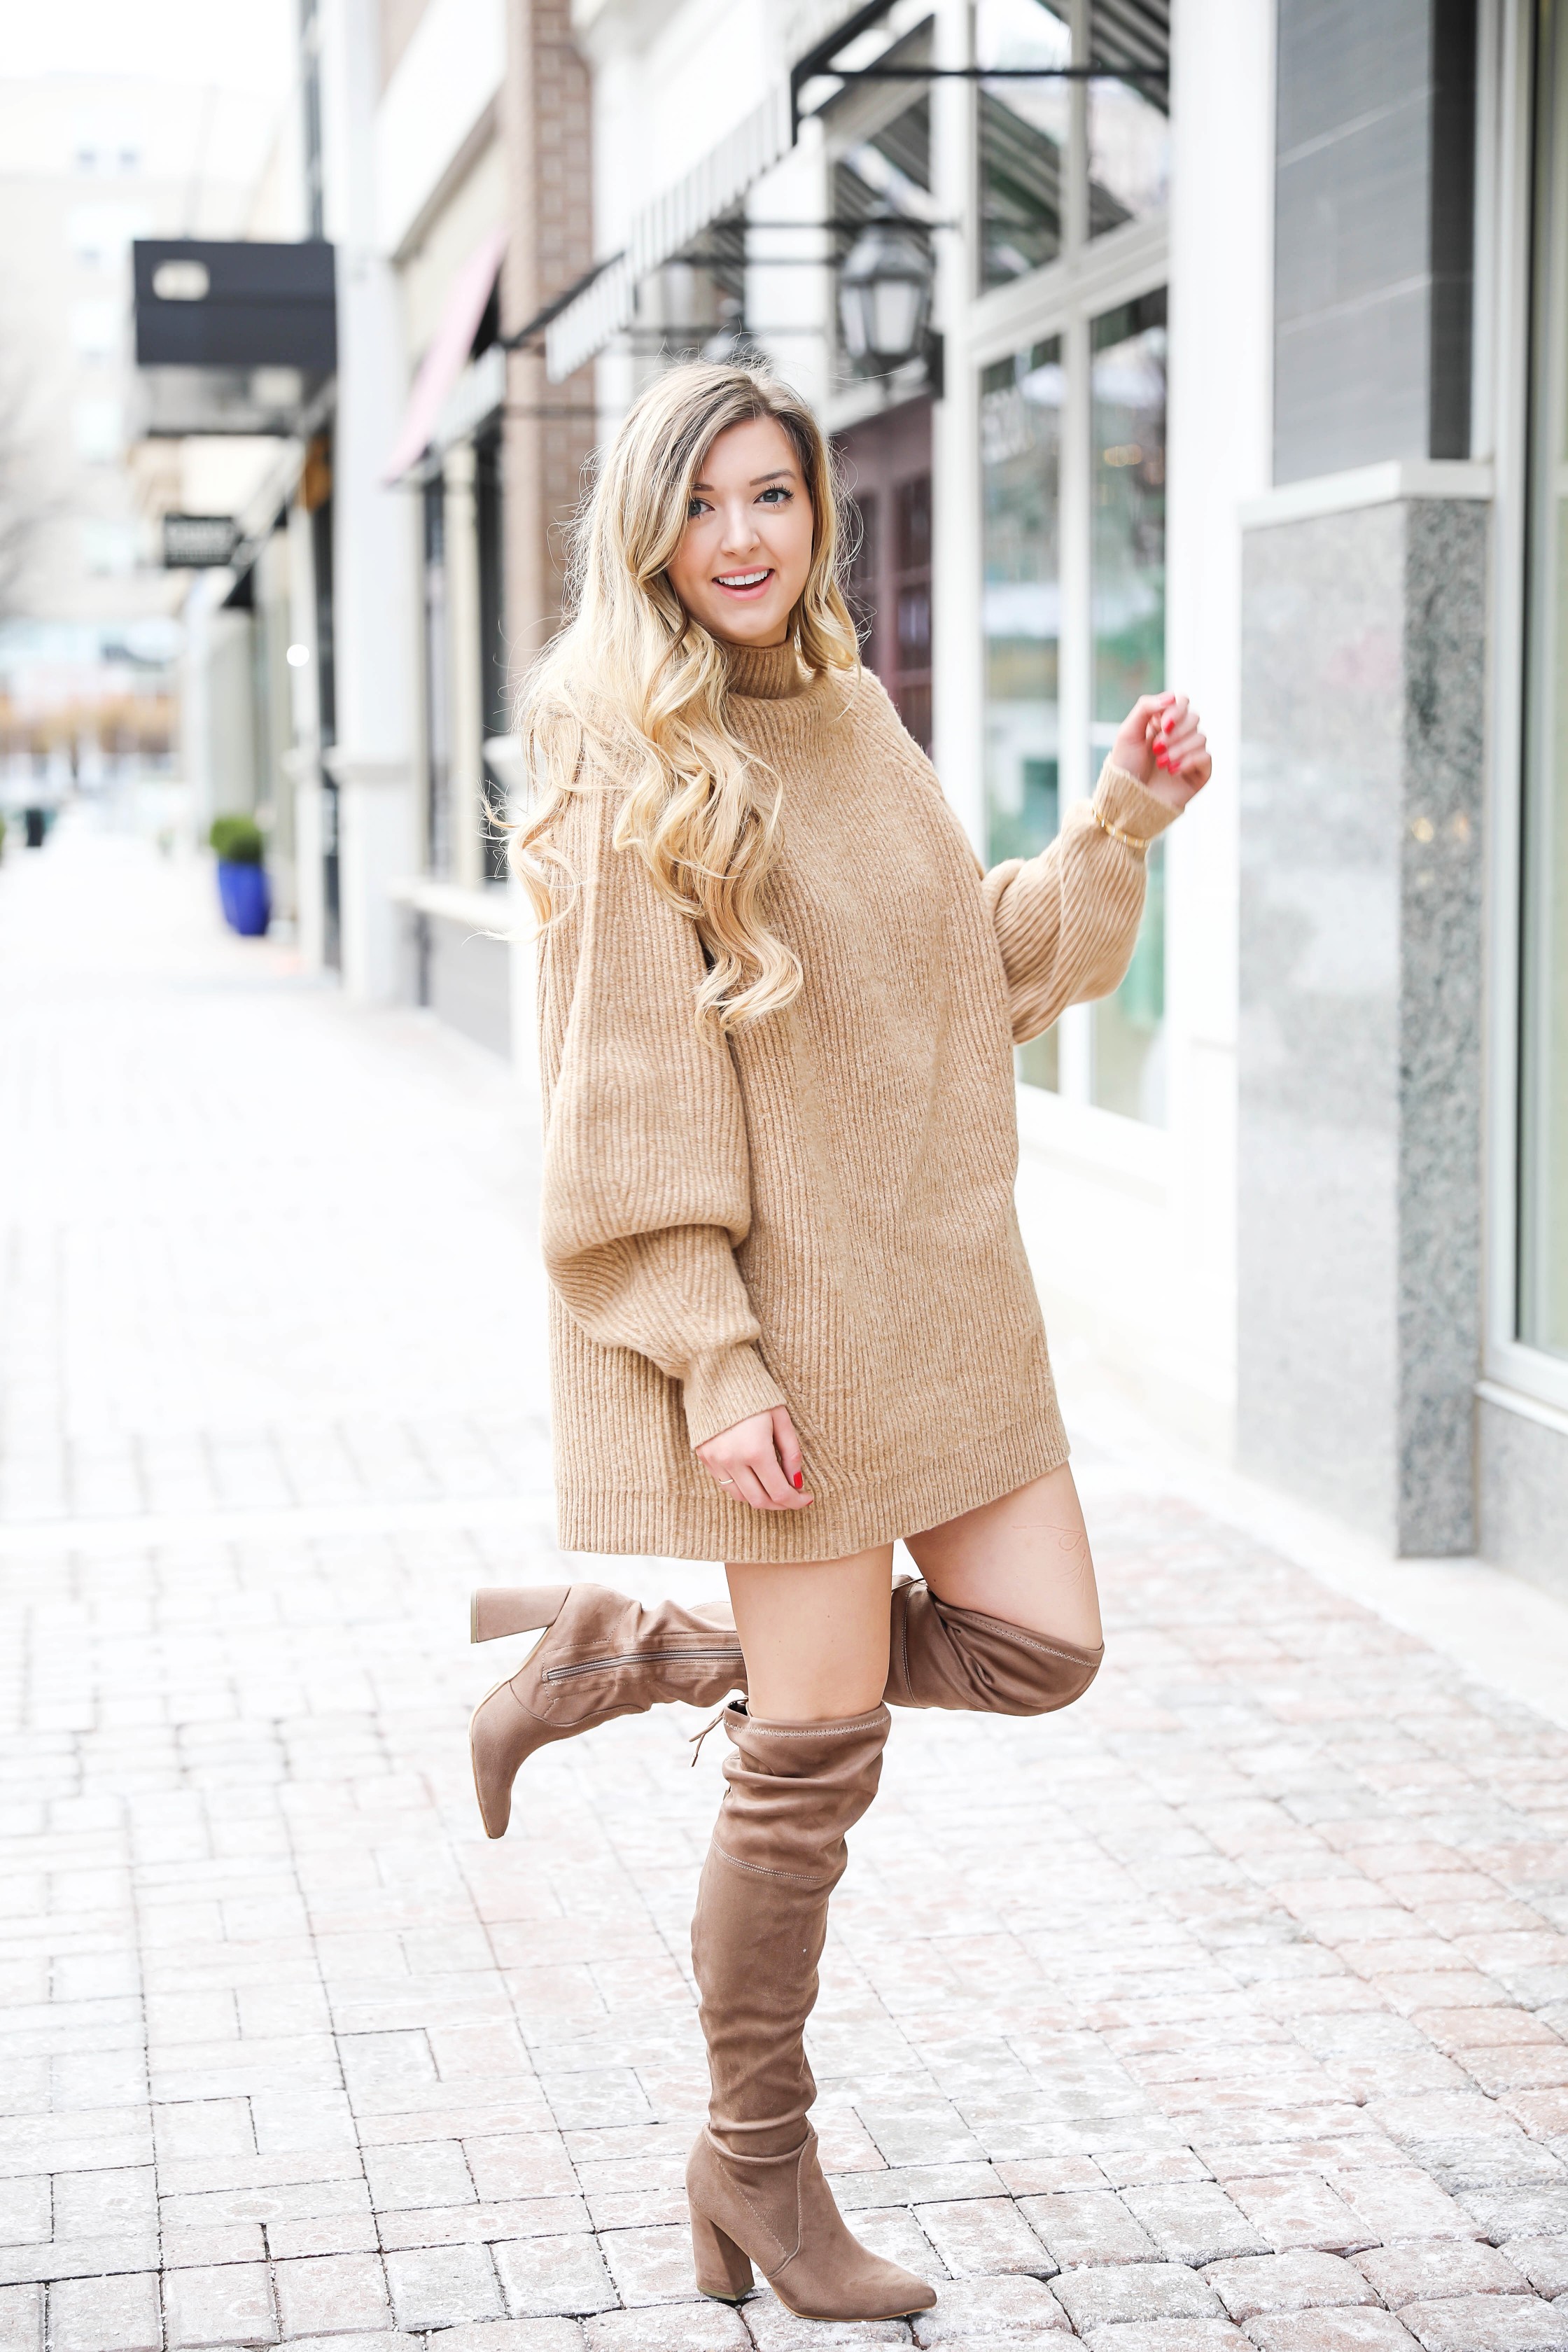 Tan sweater dress from h&m with puffy sleeves. Paired with tan over the knee heeled boots! I love otk boots for winter and spring. Details on fashion blog daily dose of charm by lauren lindmark